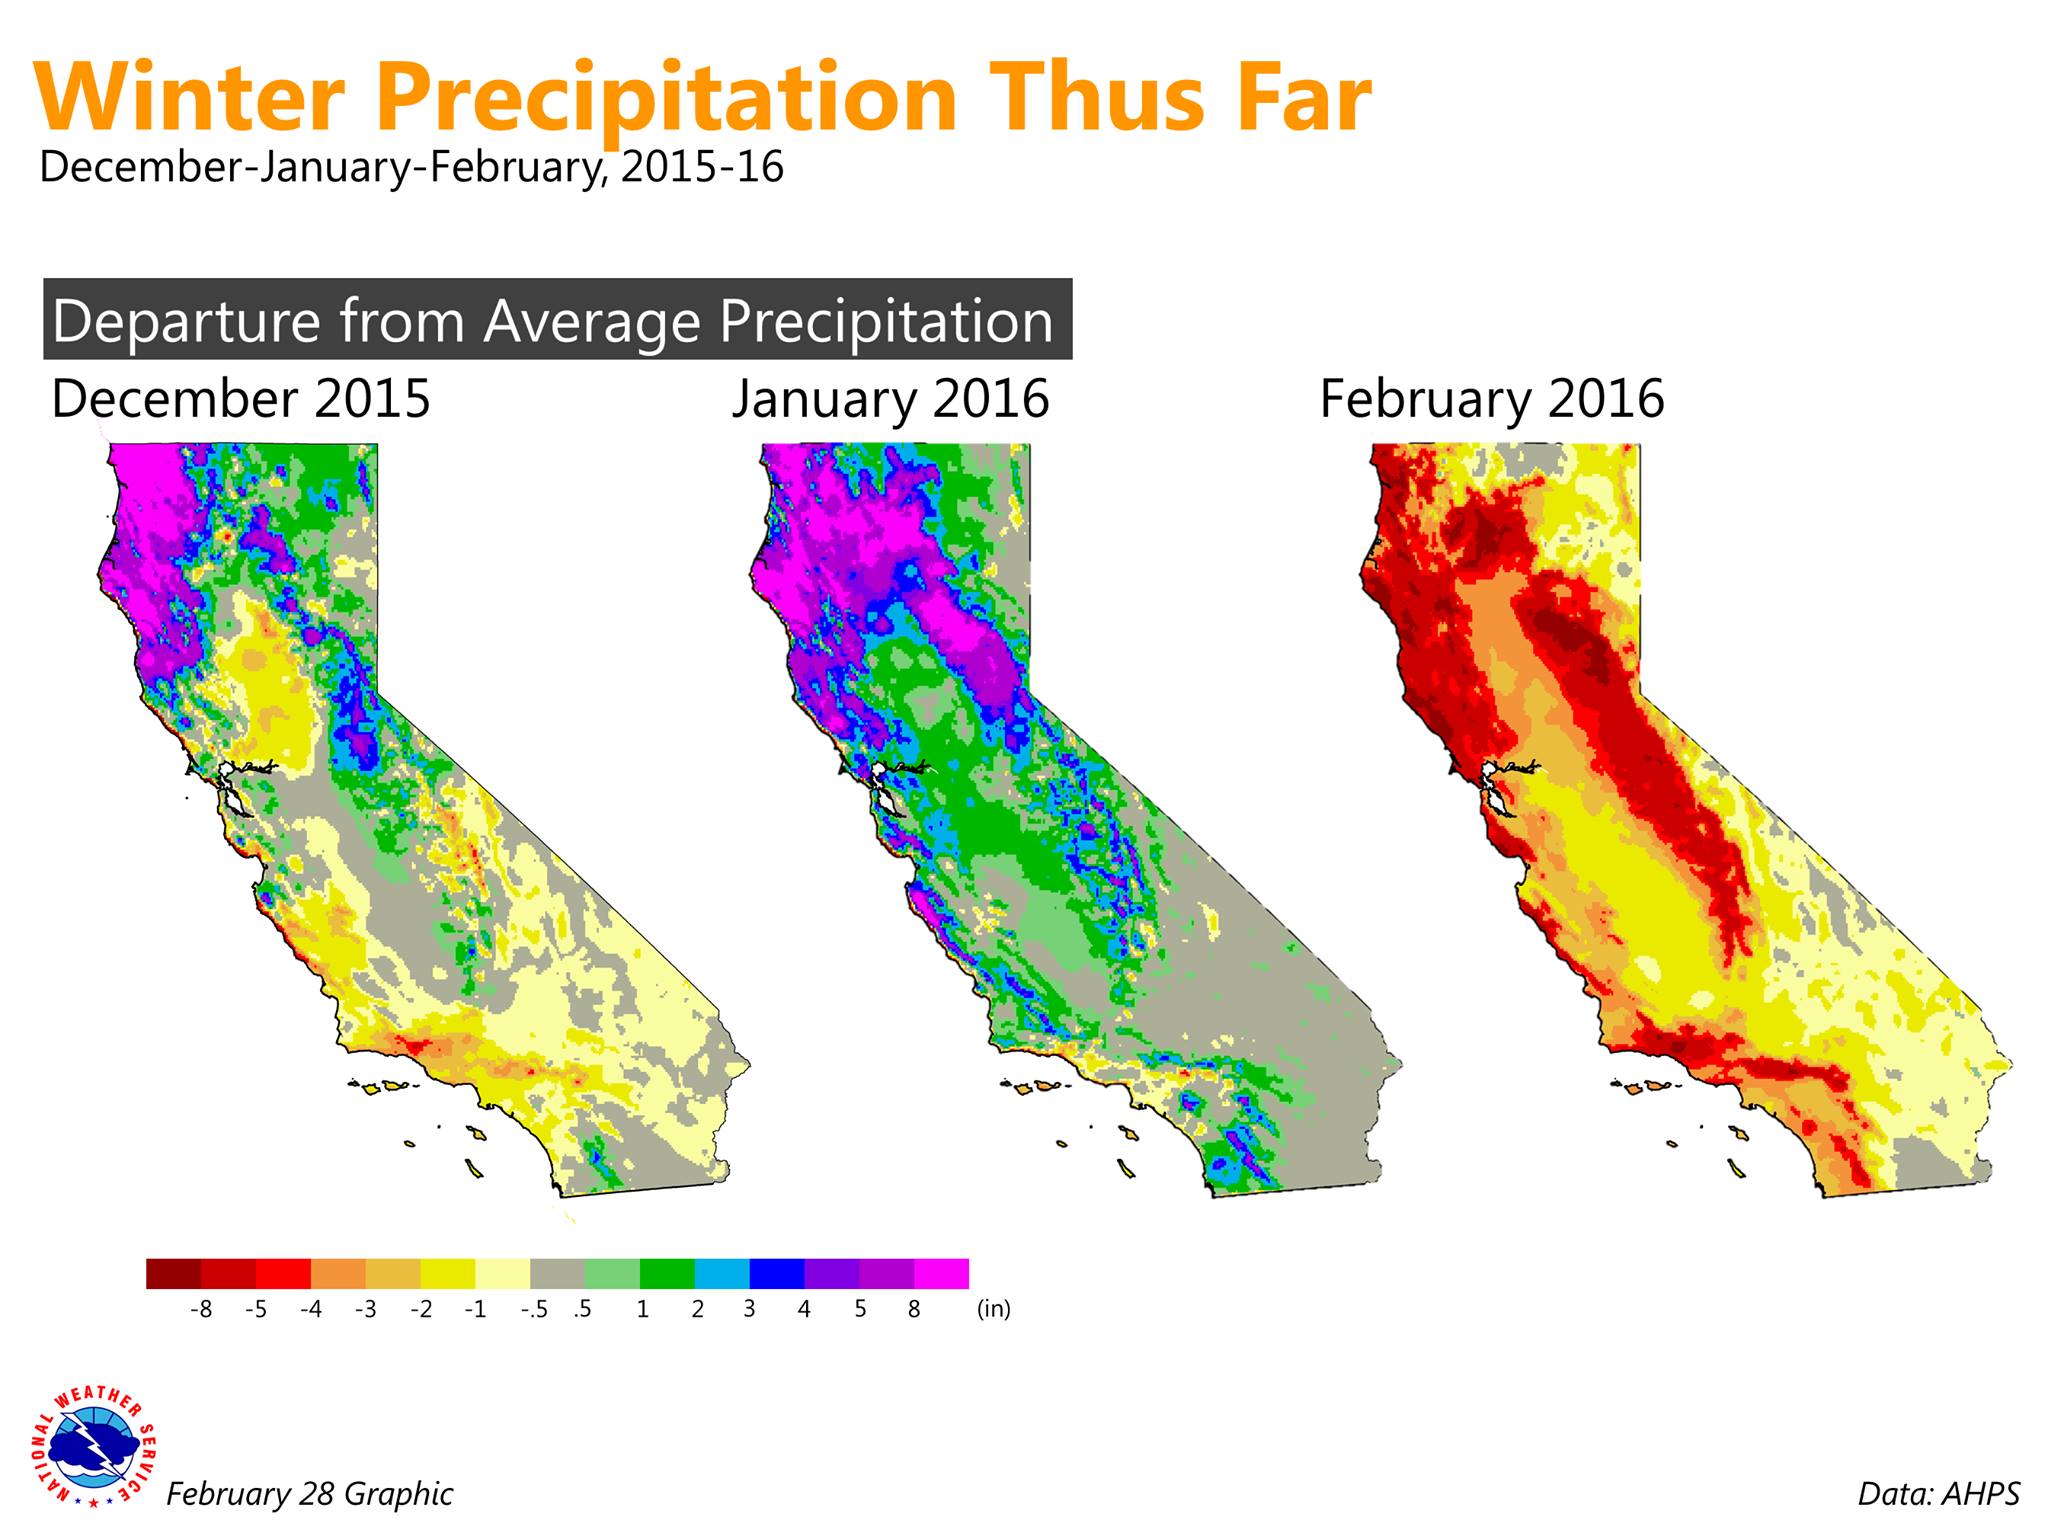 "California's winter has been a mixed bag so far this winter. We've had two moderately wet months in Northern California, offset by a very dry February. The net result: NorCal is running a bit drier than normal on the water year." - NOAA Sacramento, CA today